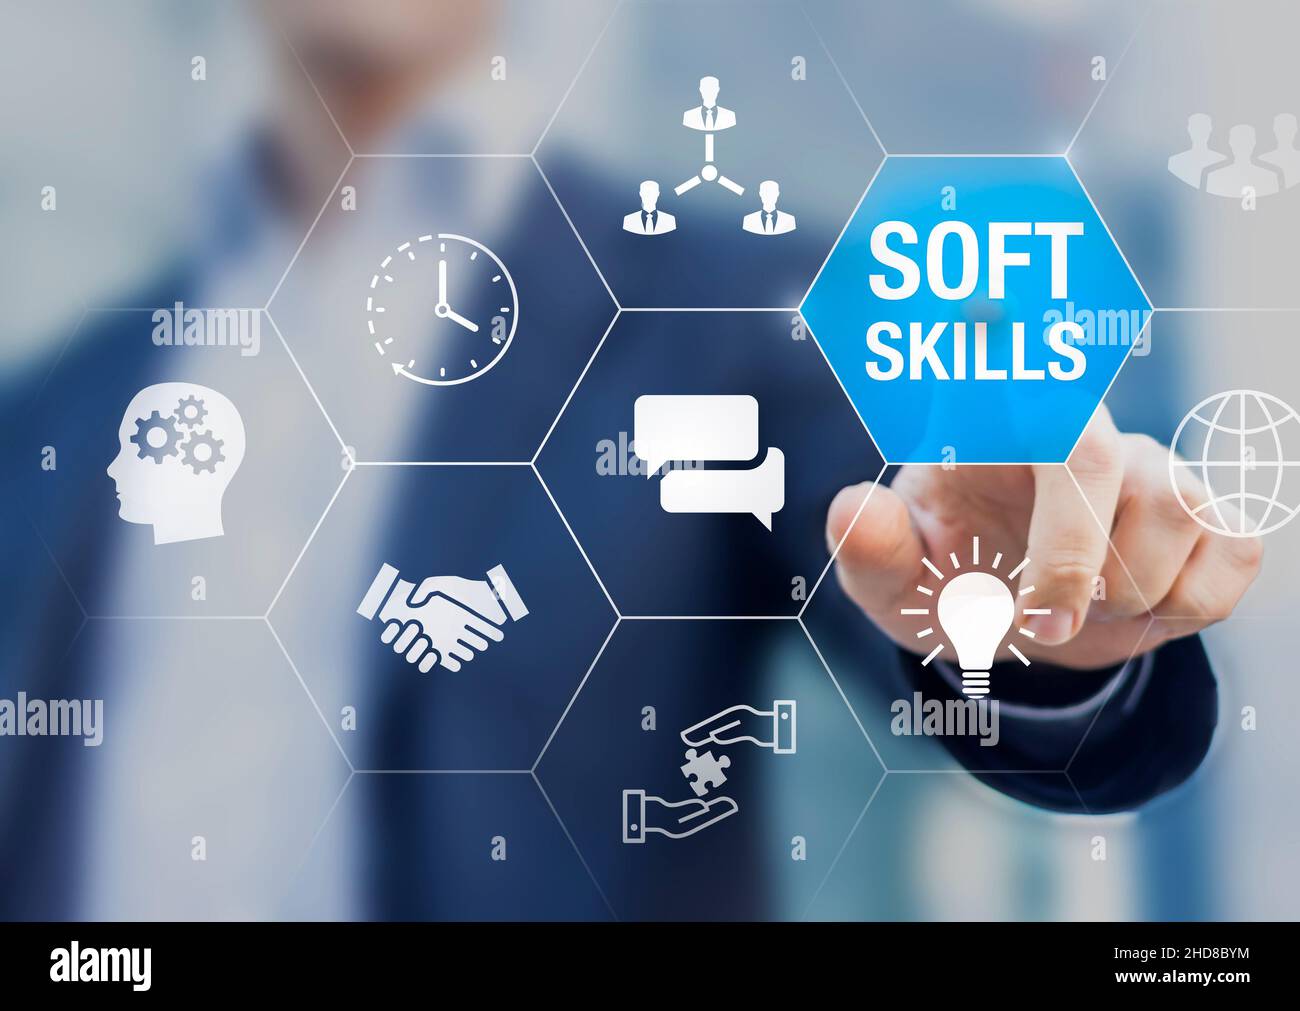 Soft skills and personal development for professionals and HR concept with teamwork, communication, leadership, emotional intelligence, time managemen Stock Photo